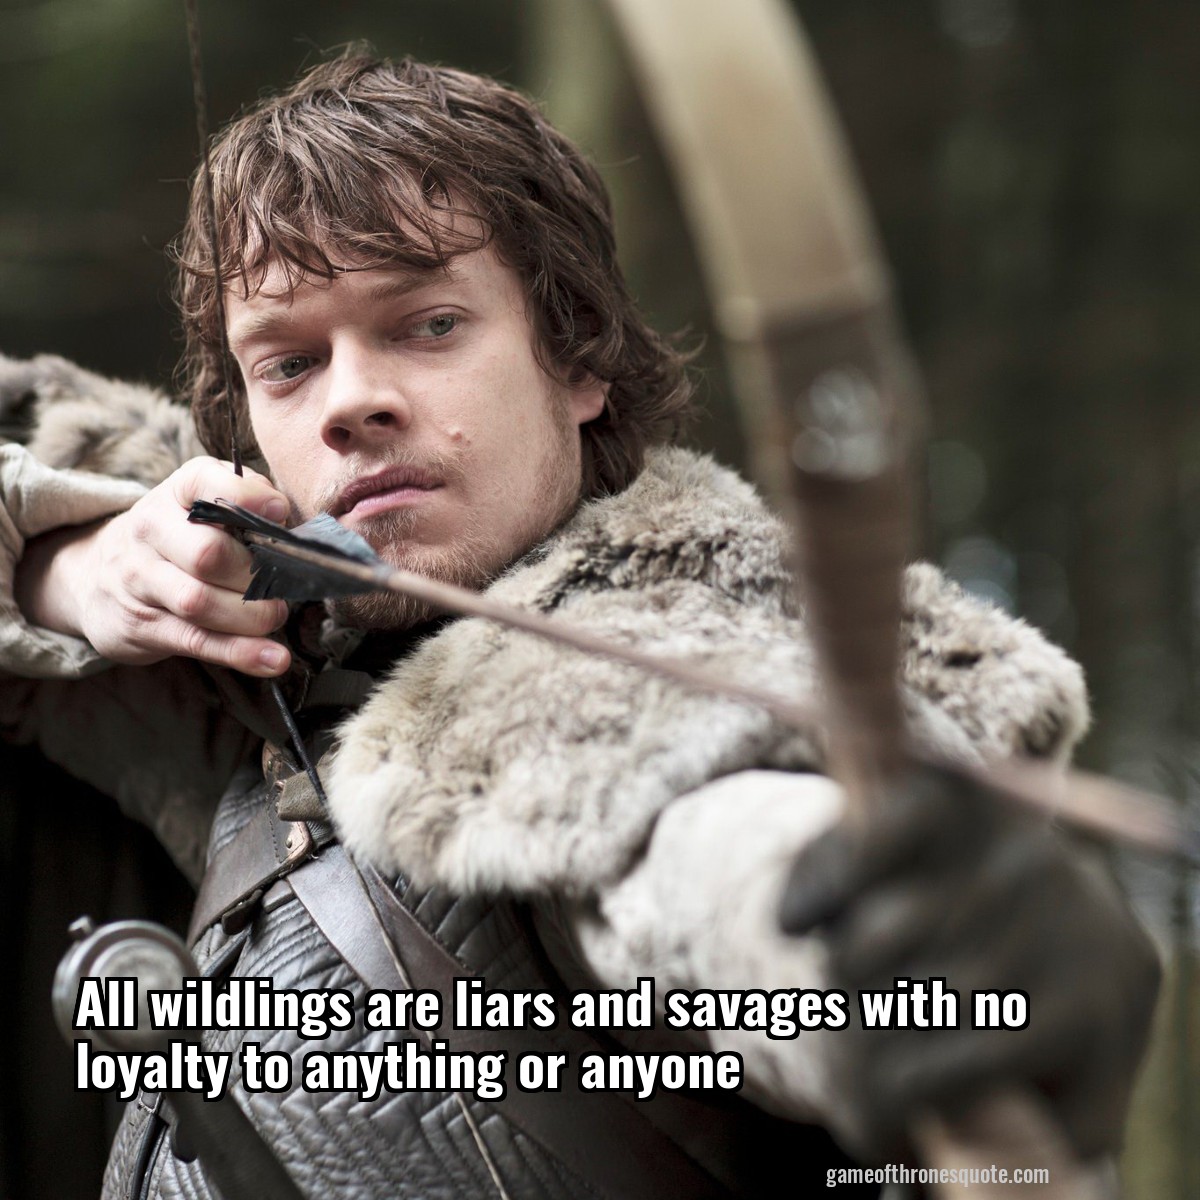 All wildlings are liars and savages with no loyalty to anything or anyone